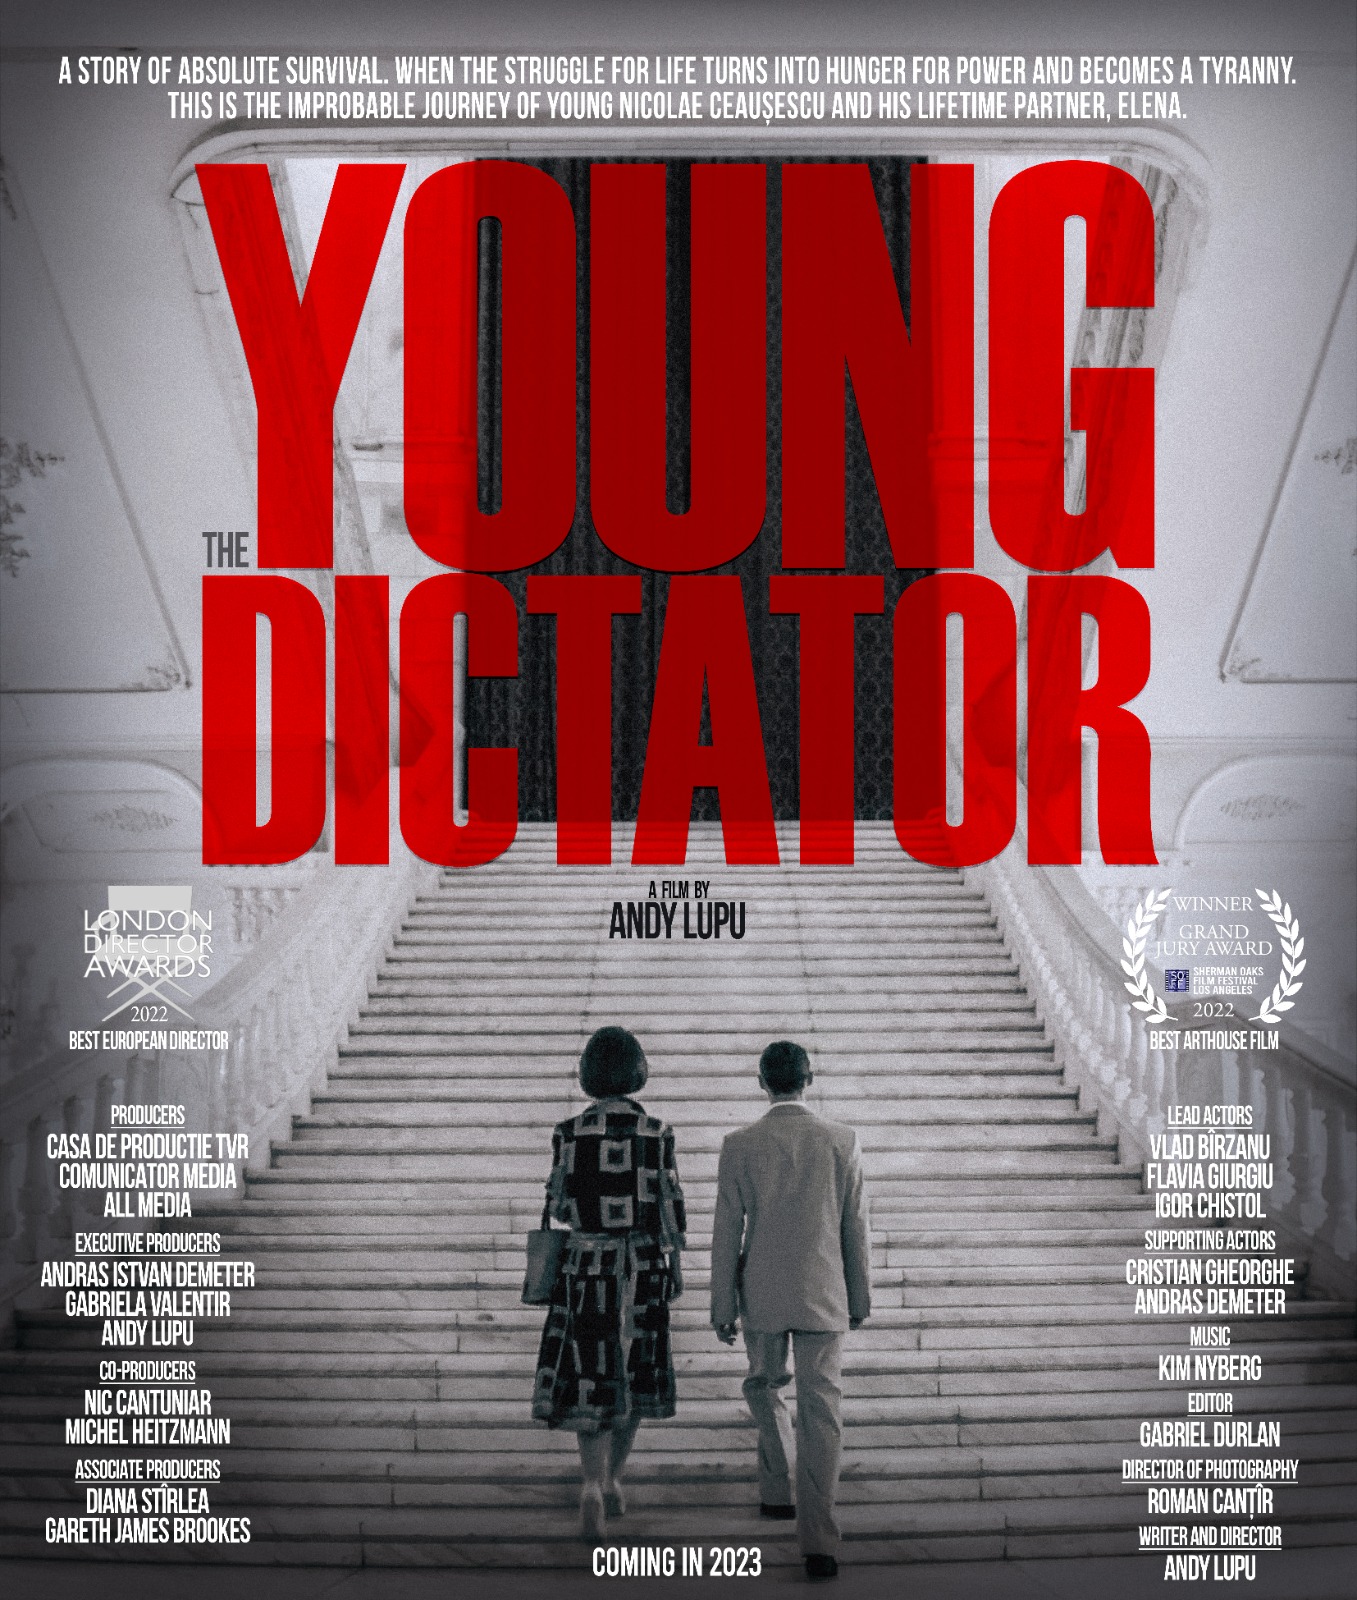 The Young Dictator